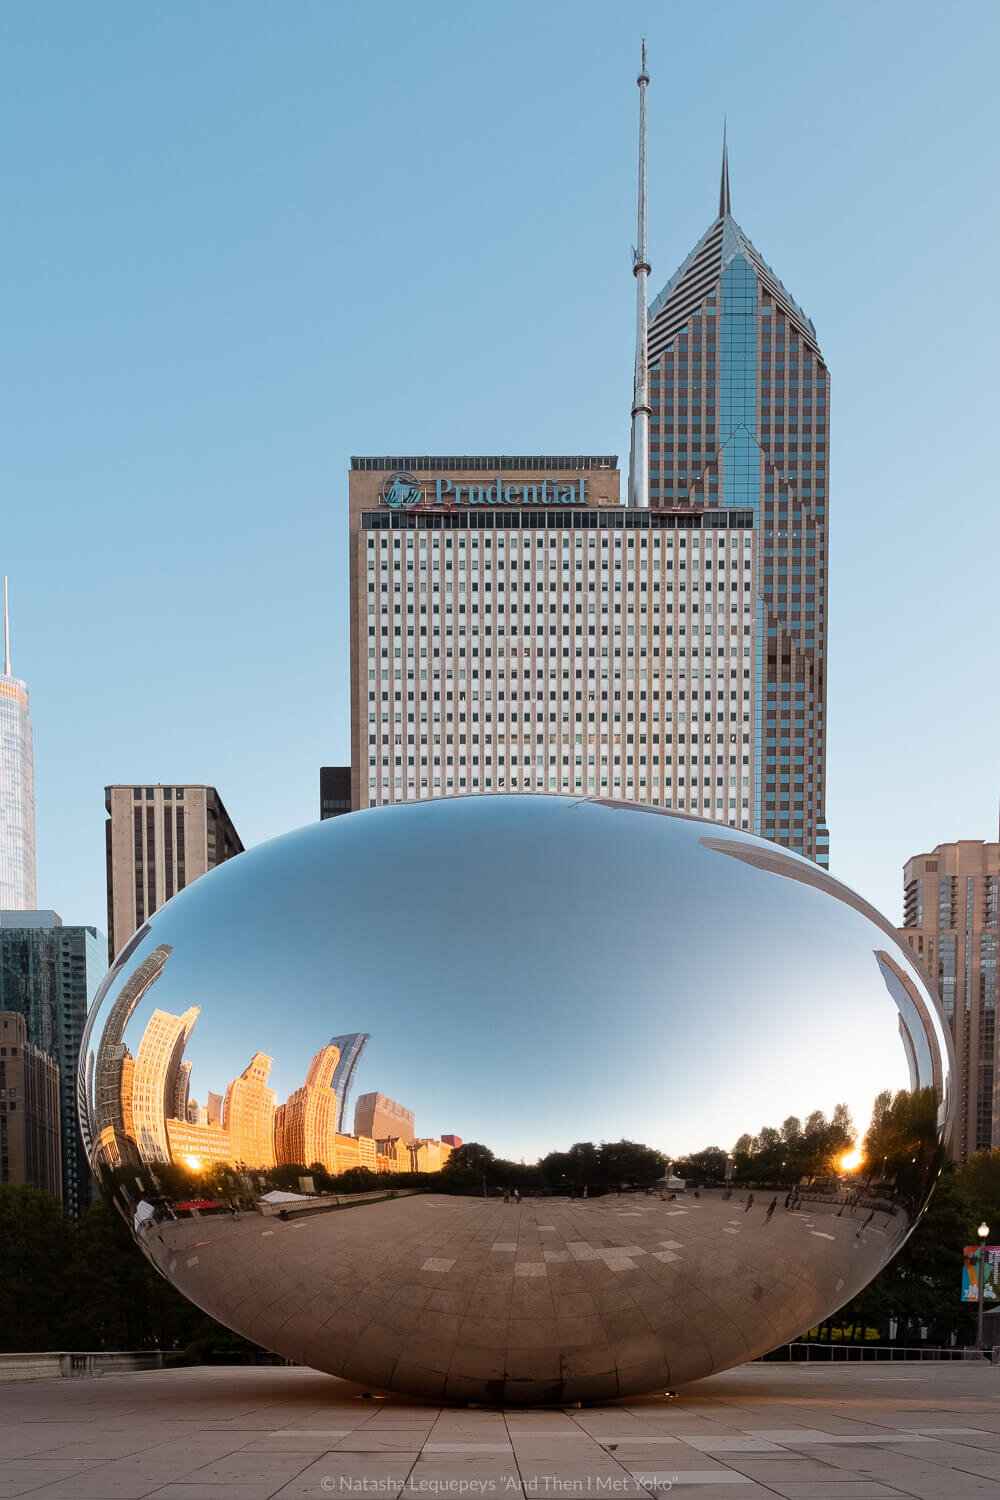 The Bean at sunrise, Chicago, USA. Travel photography and guide by © Natasha Lequepeys for "And Then I Met Yoko". #chicago #usa #travelblog #travelphotography